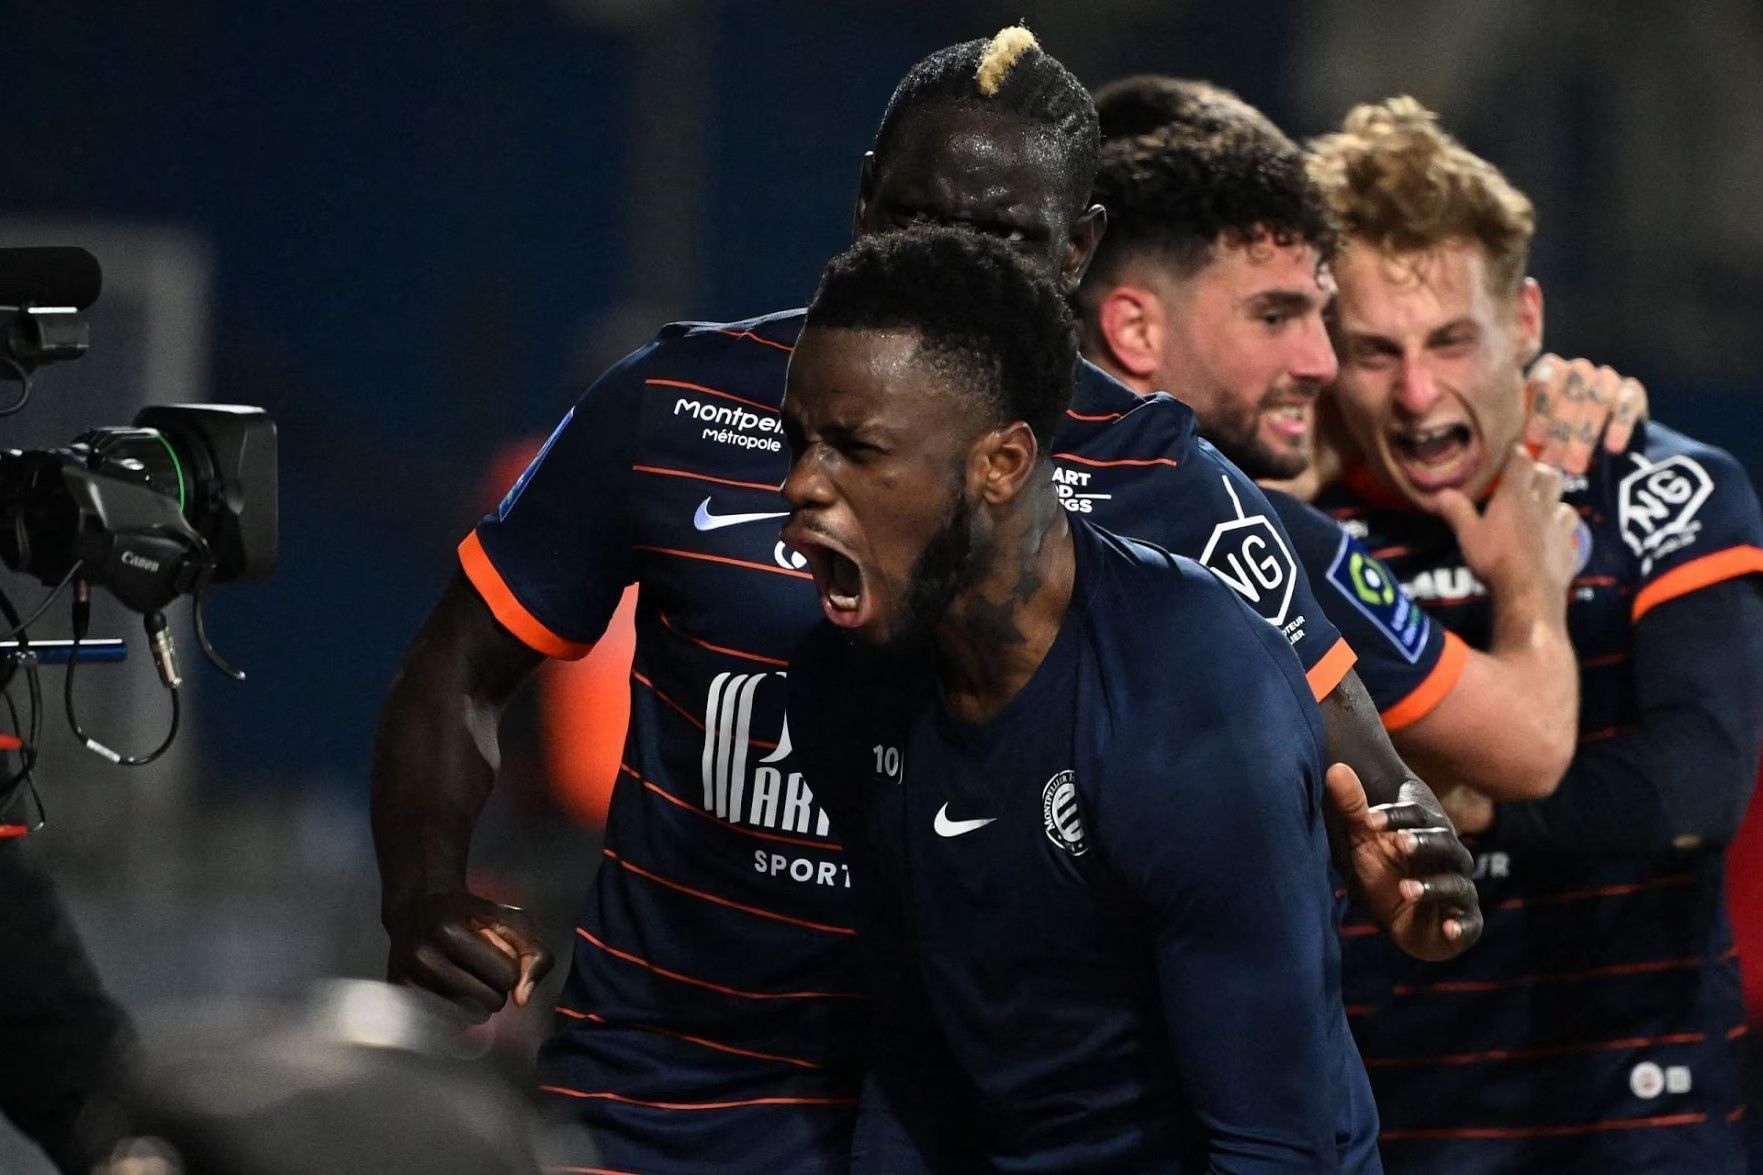 Bordeaux will host Montpellier on Sunday - Ligue 1